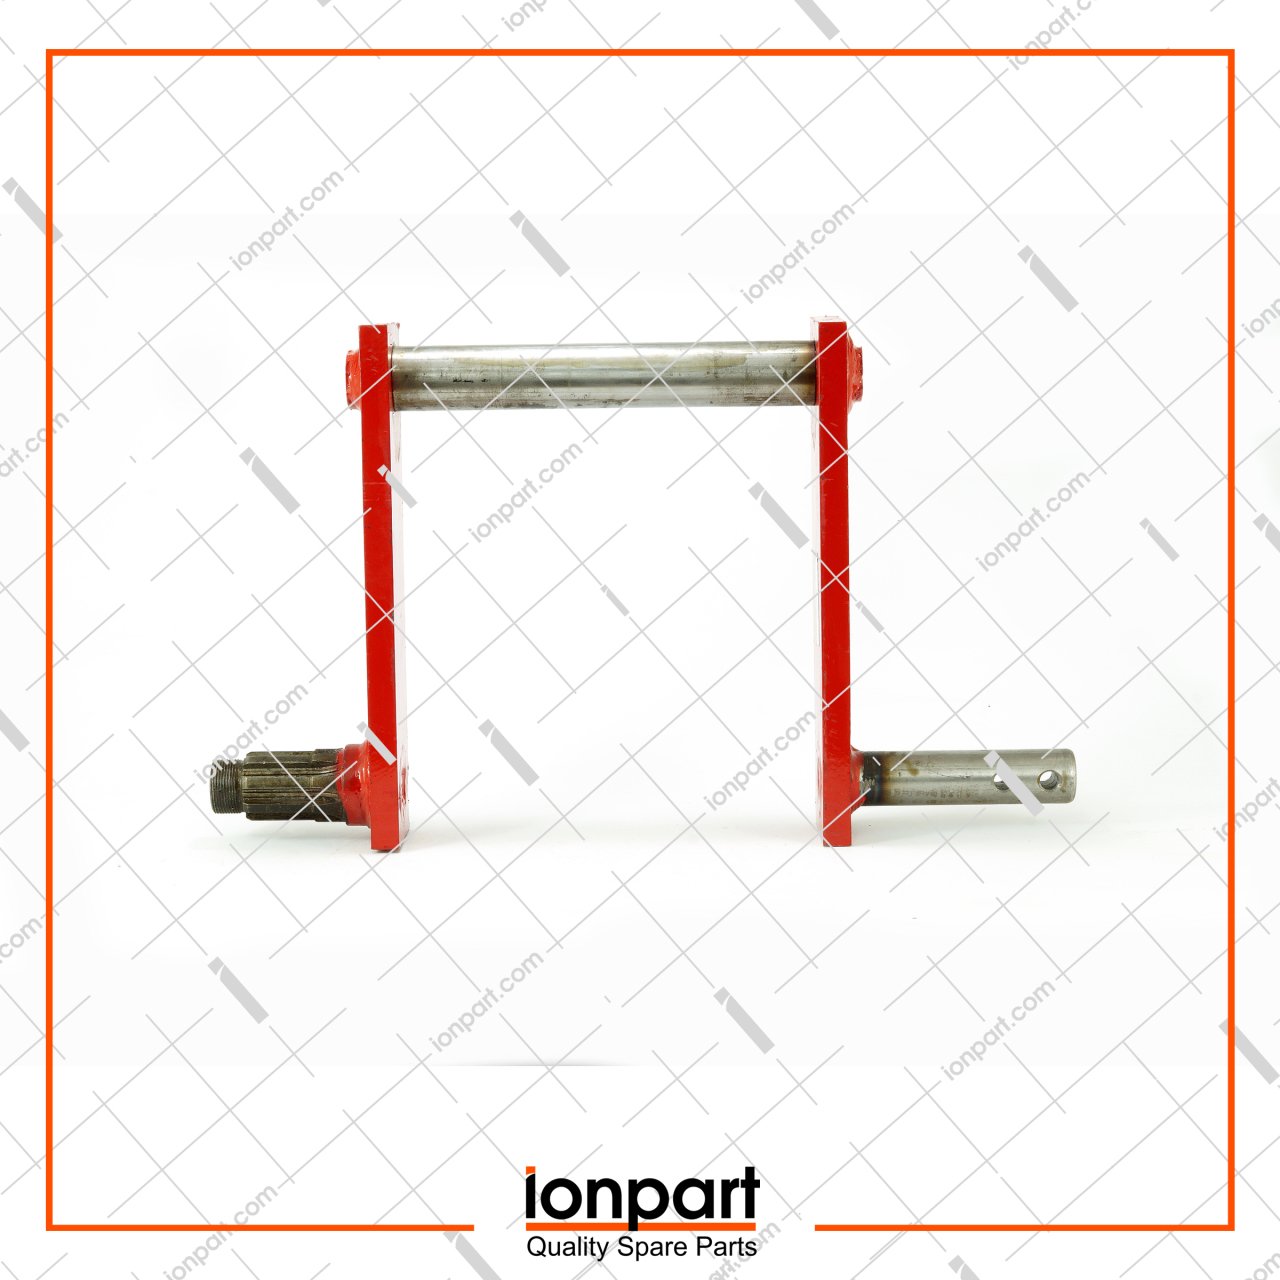 Feeding Left Shaft Compatible With Cicoria Baler